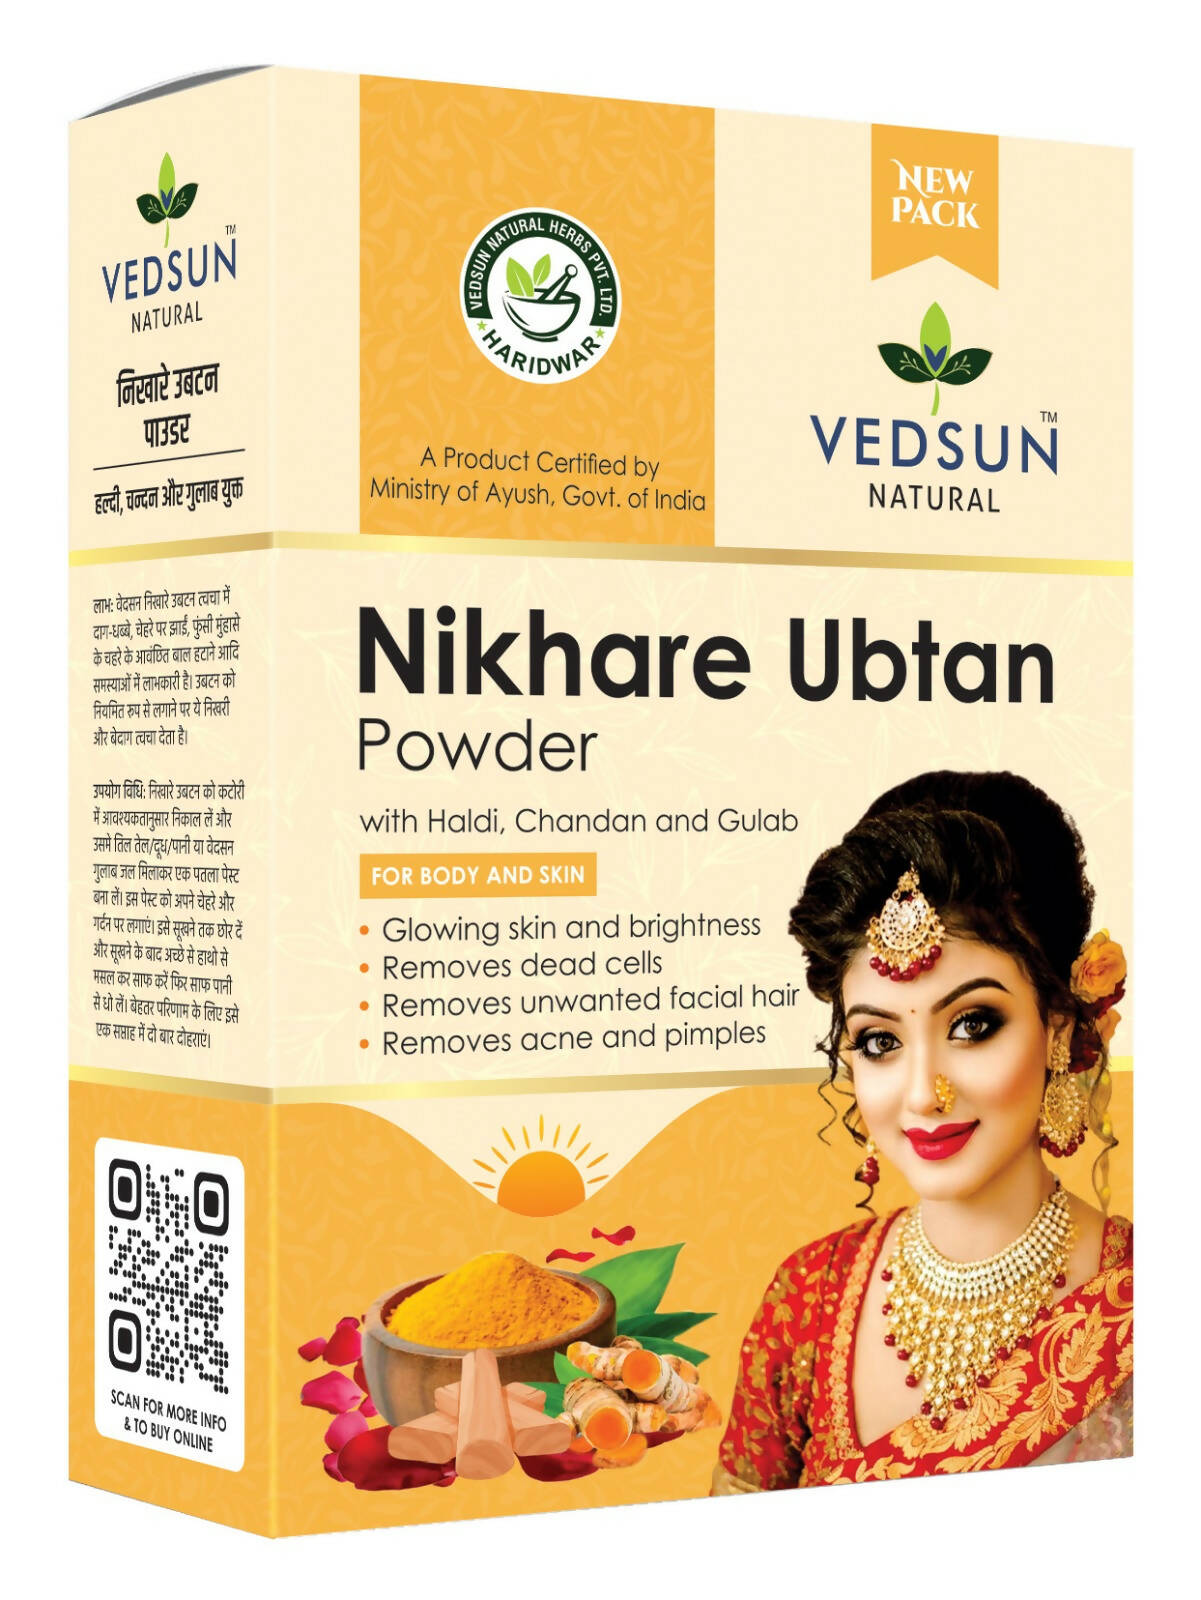 Vedsun Naturals Nikhare Ubtan Powder for Face and Skin